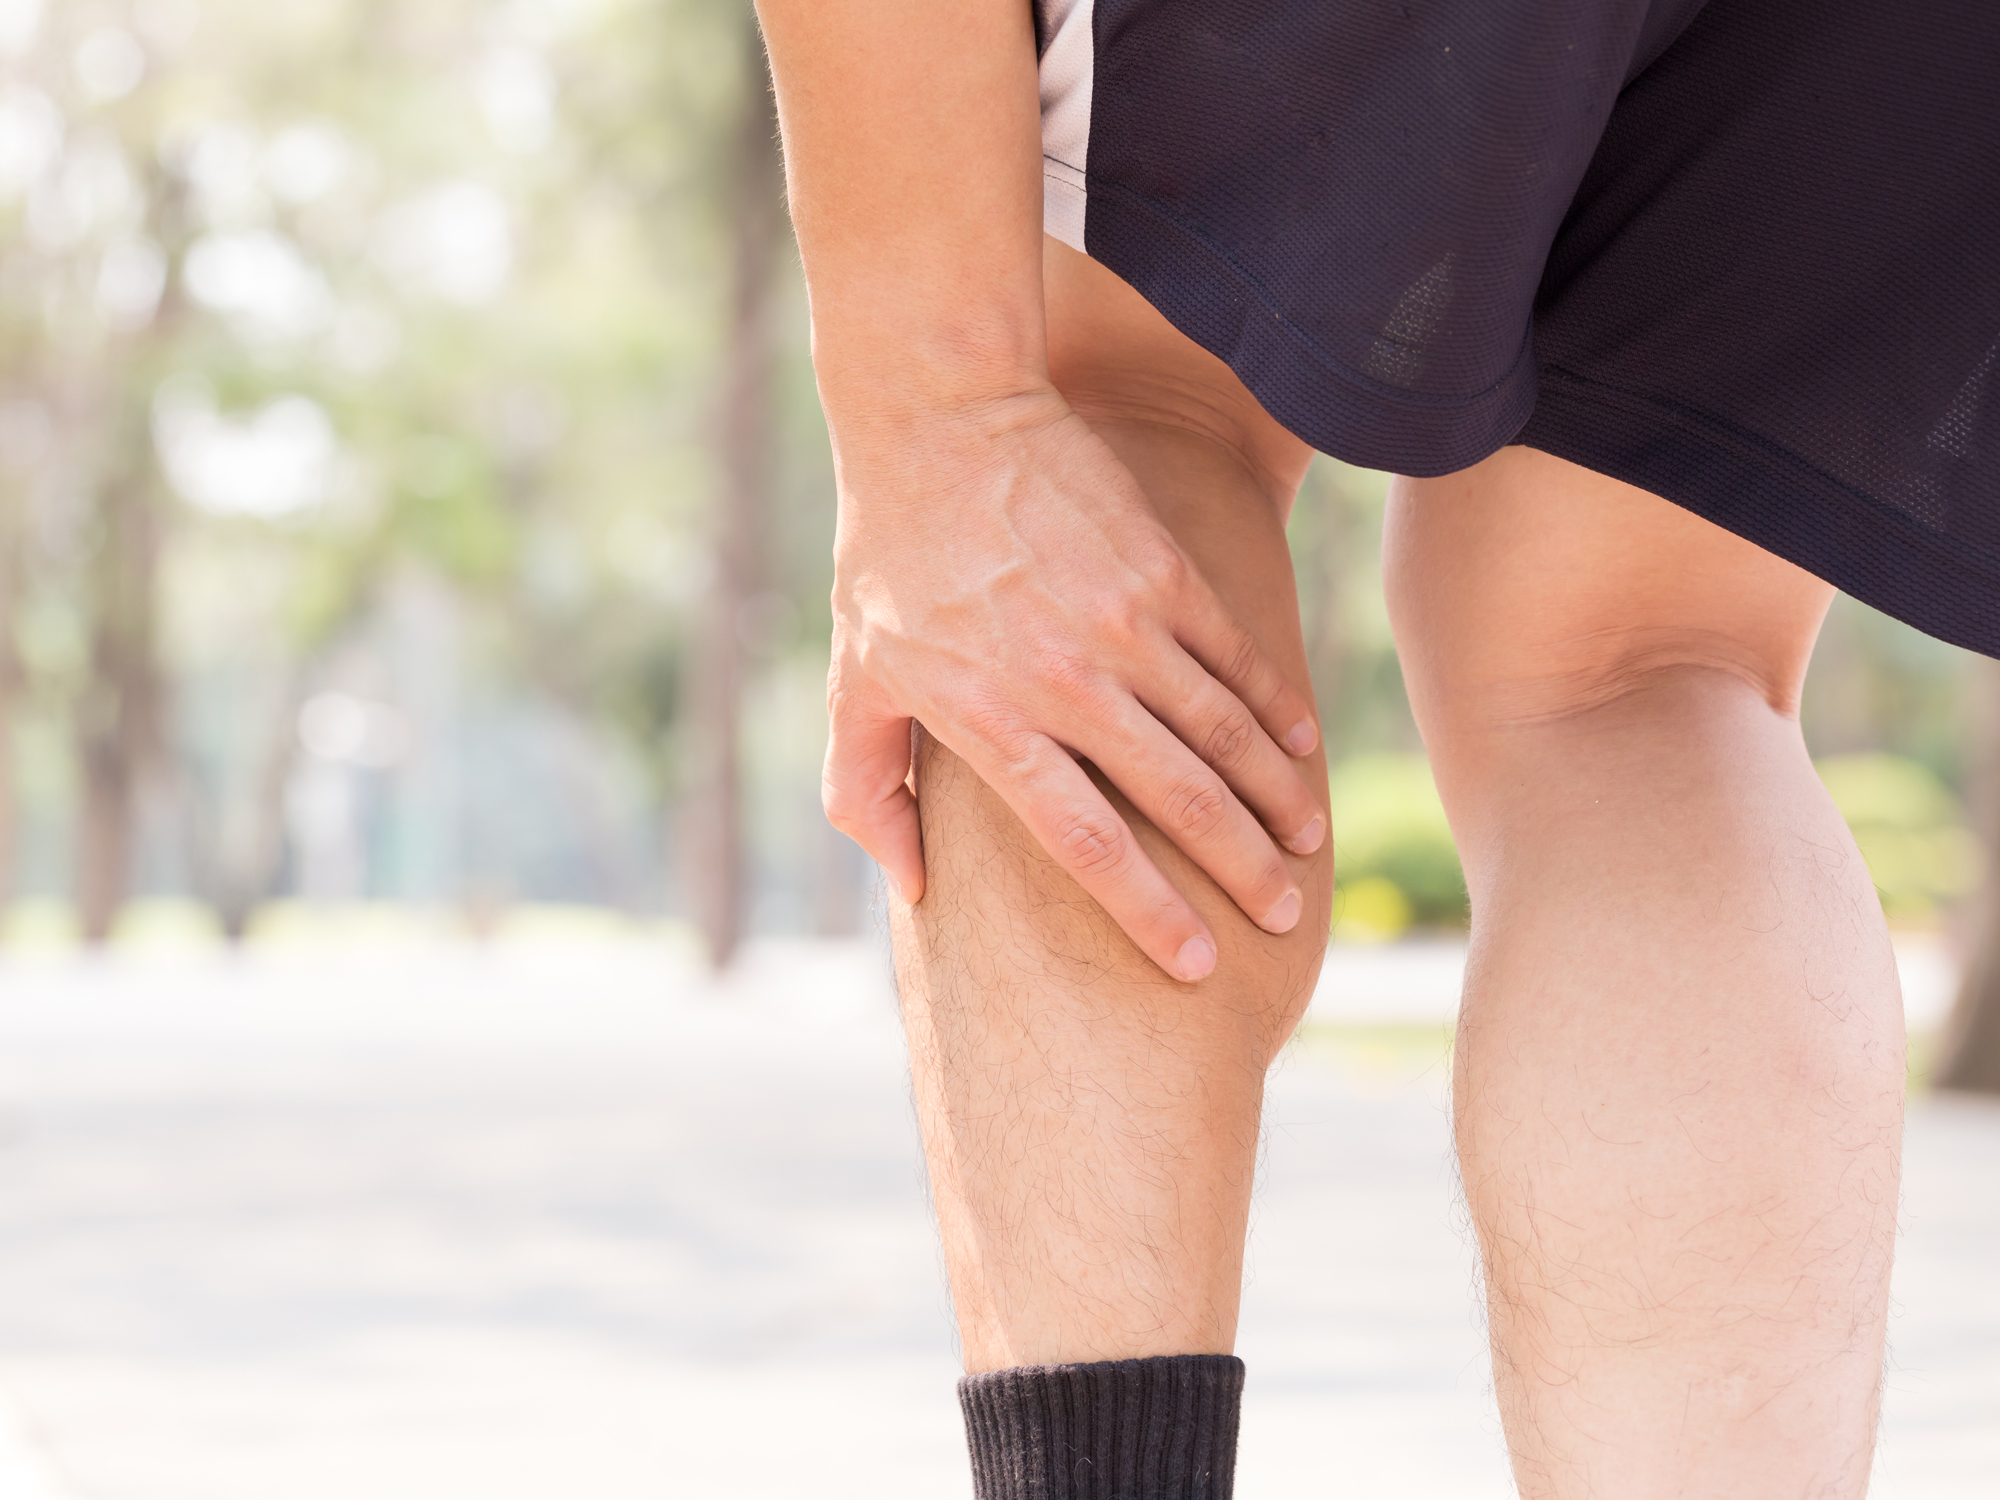 6 things muscle cramps say about your health